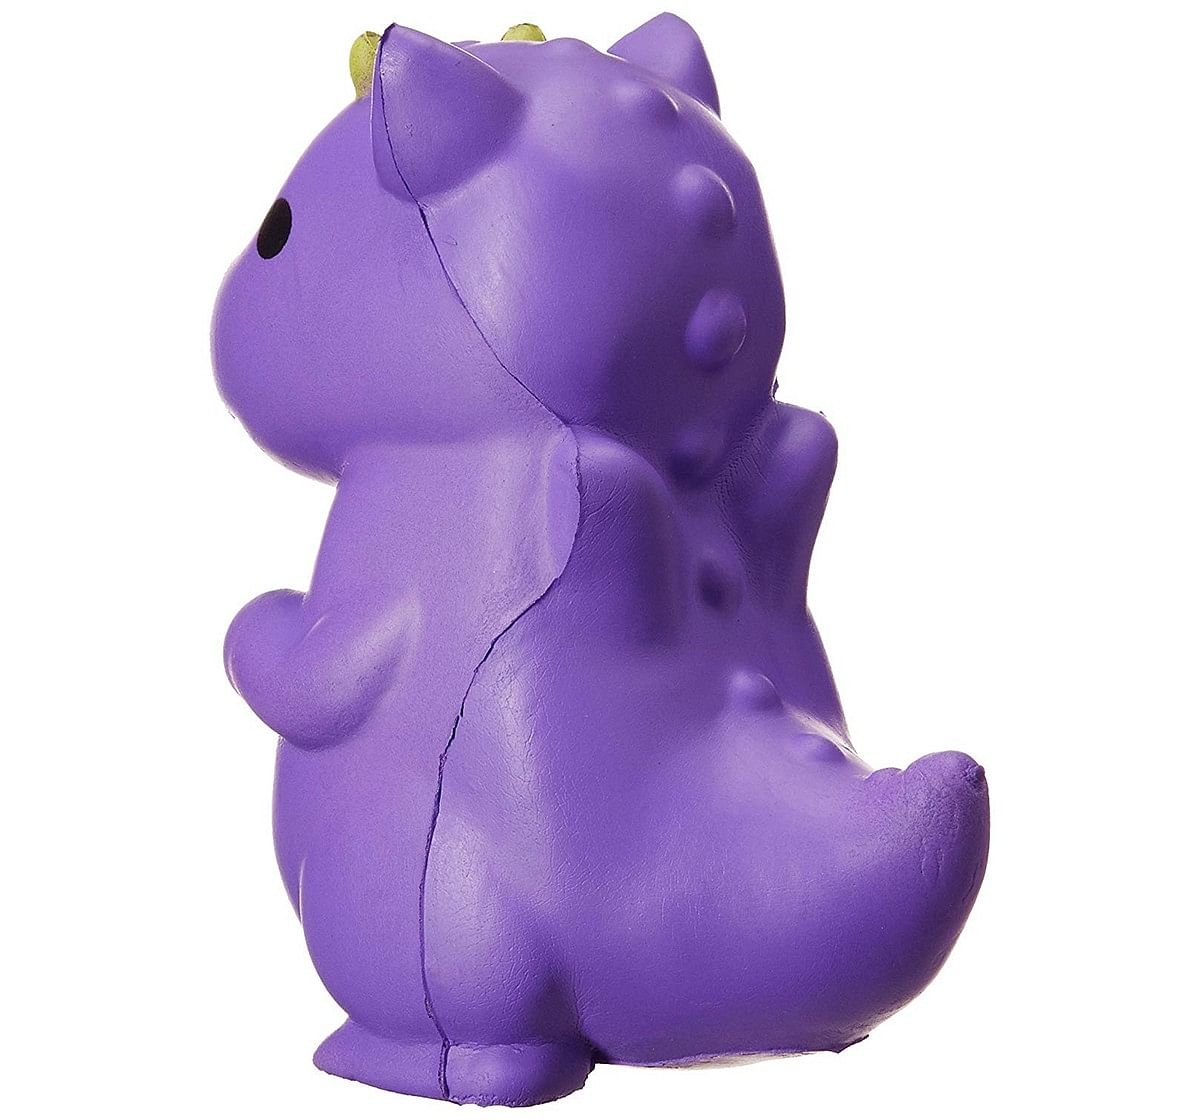 Win Magic Toys Soft And Slow Squishies - Novelty for Kids age 8Y+ (Purple)